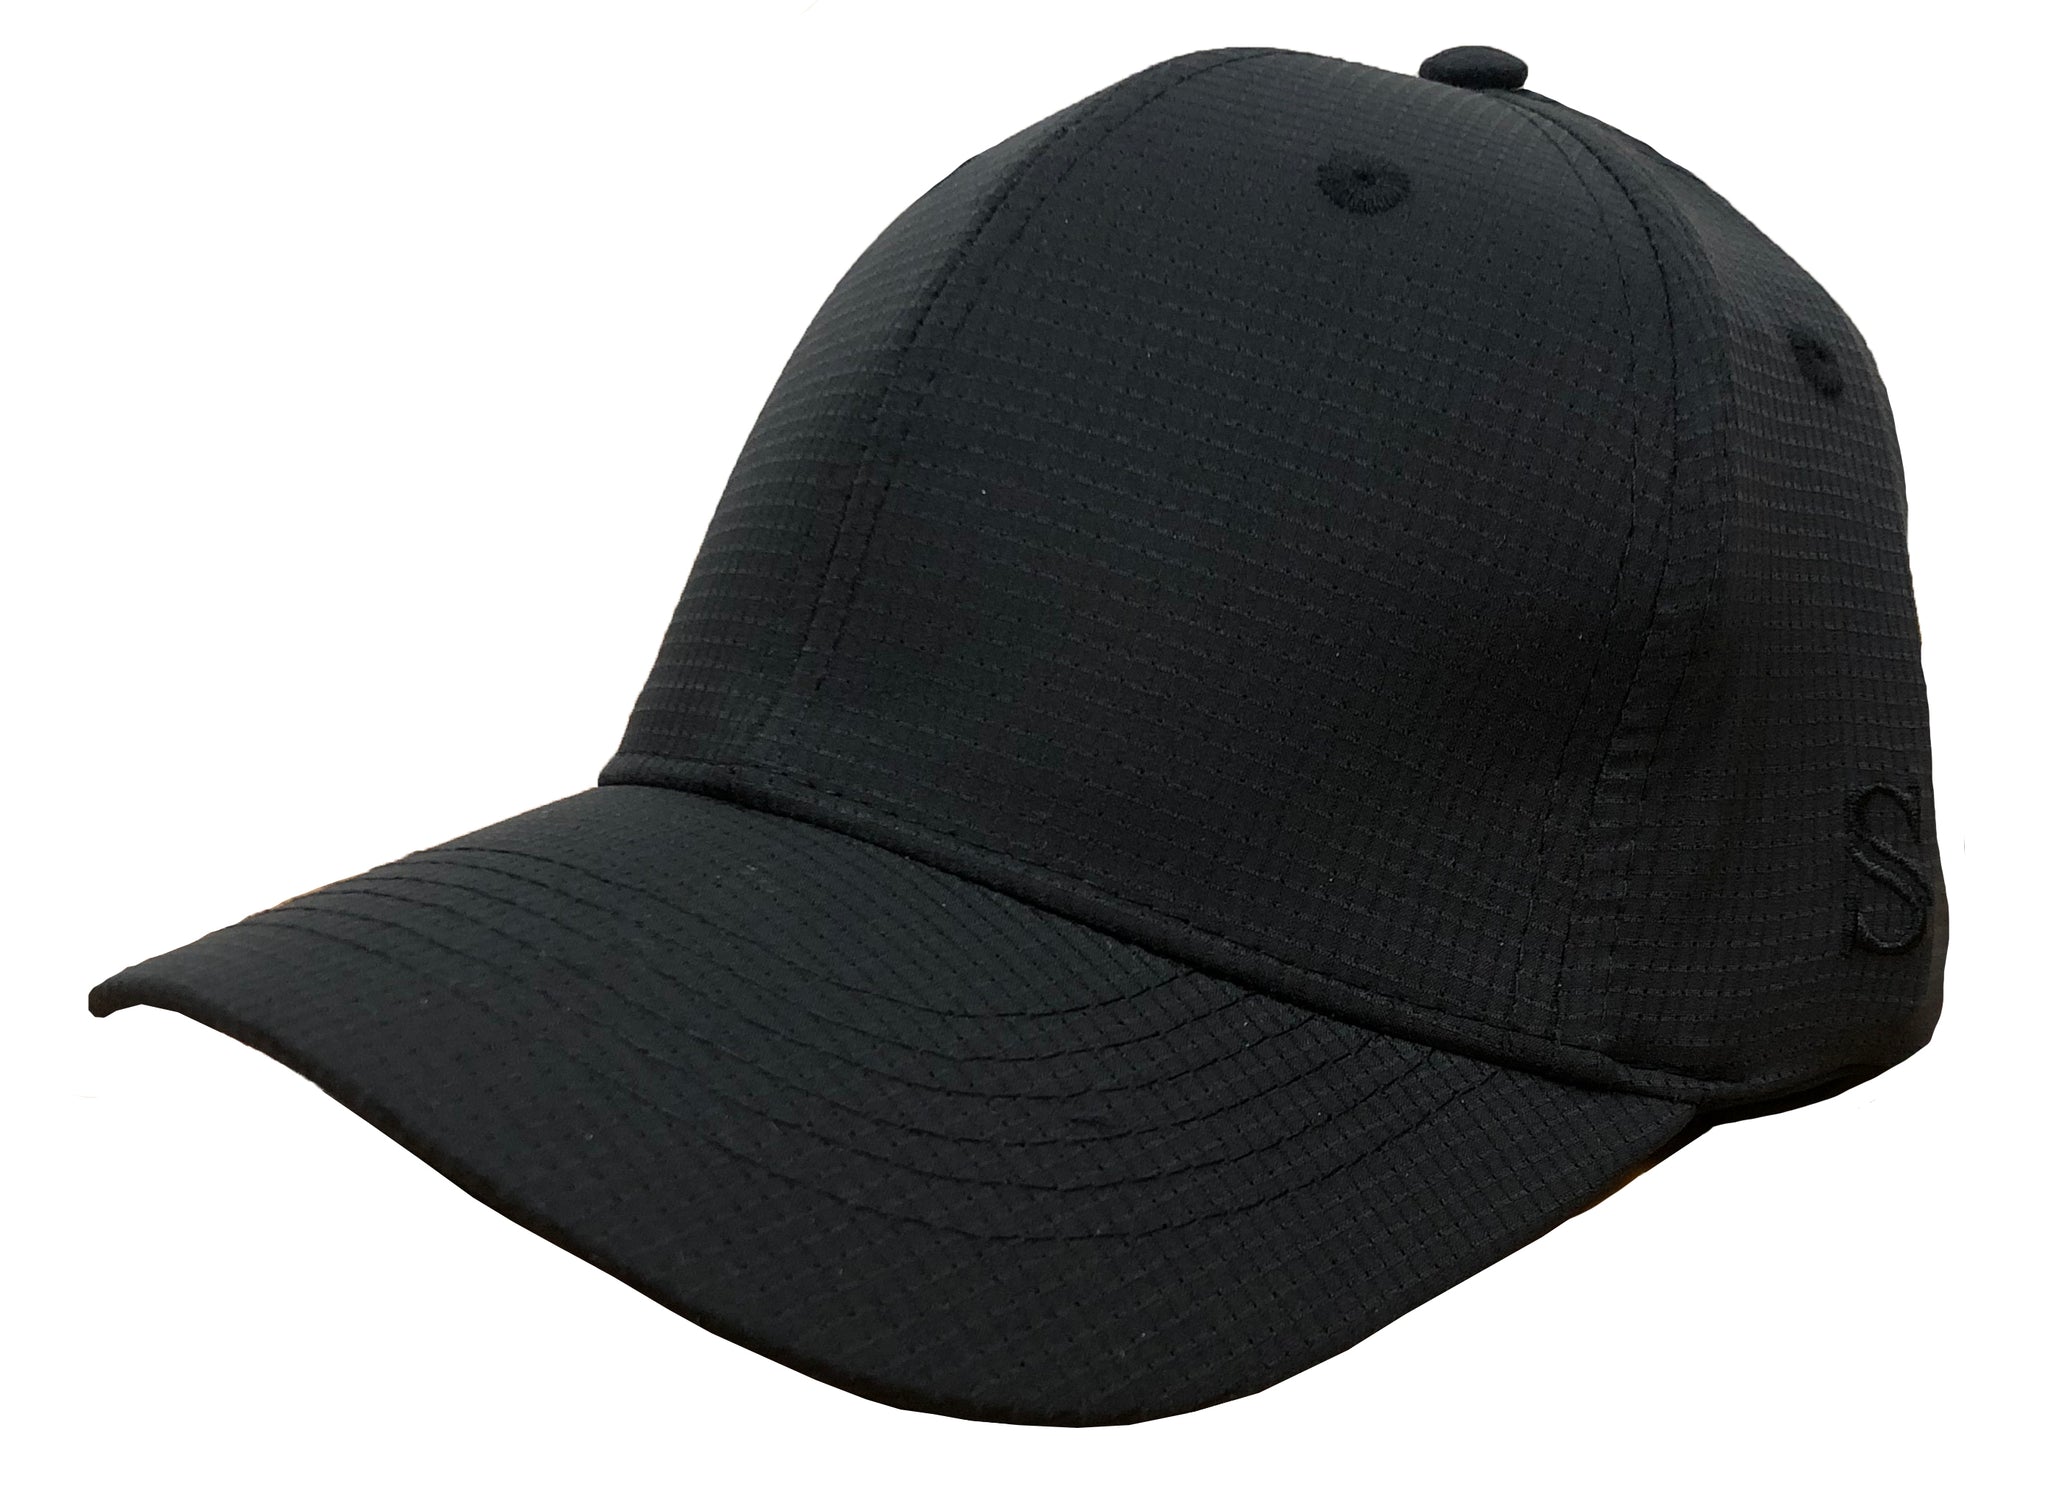 HT316 - Smitty - 6 Stitch Performance Flex Fit Umpire Hat - Available in Black or Navy